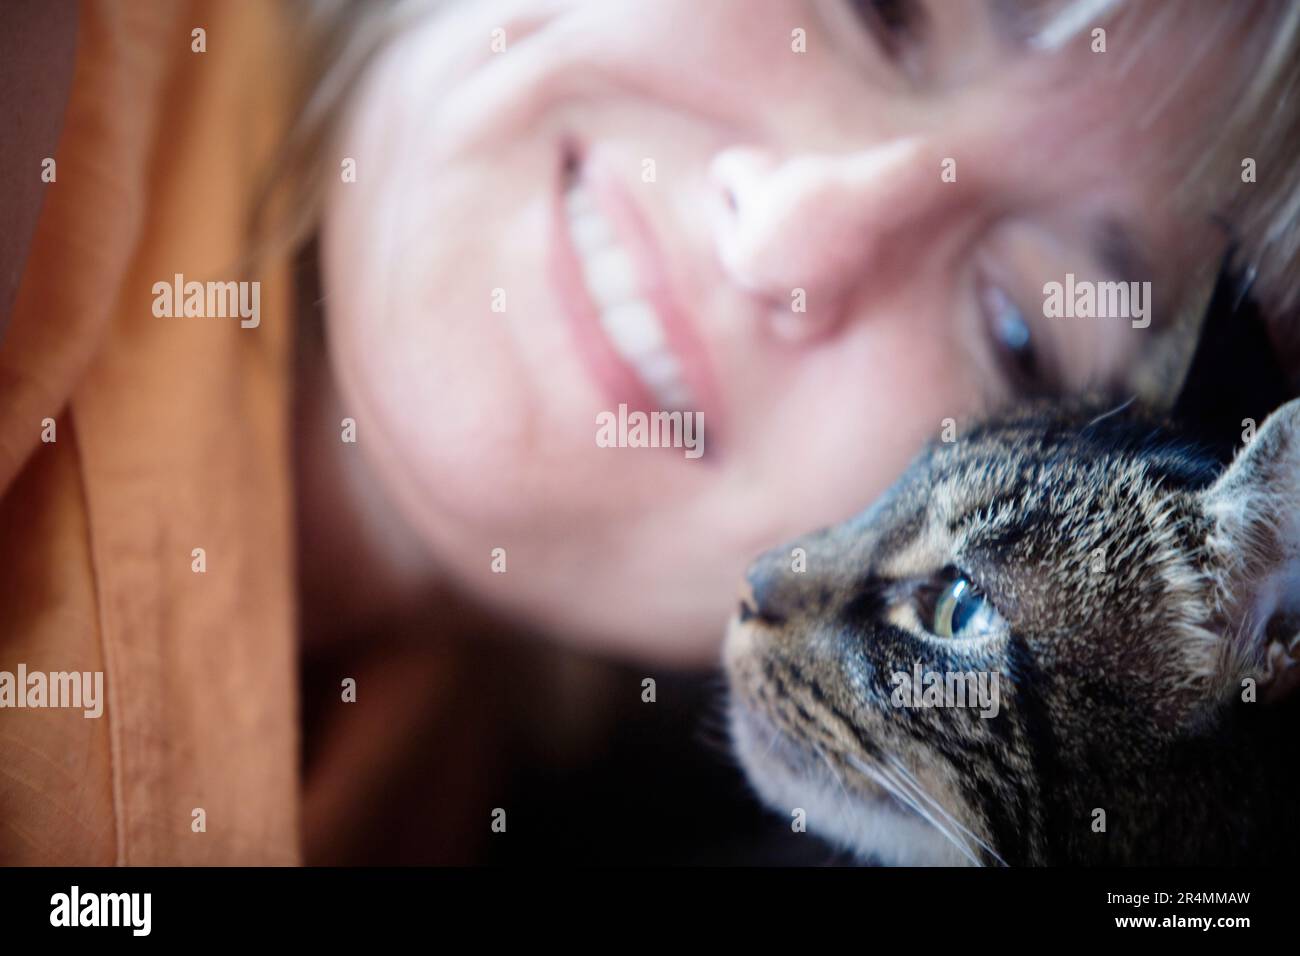 A woman lovingly looking at her cat. Stock Photo